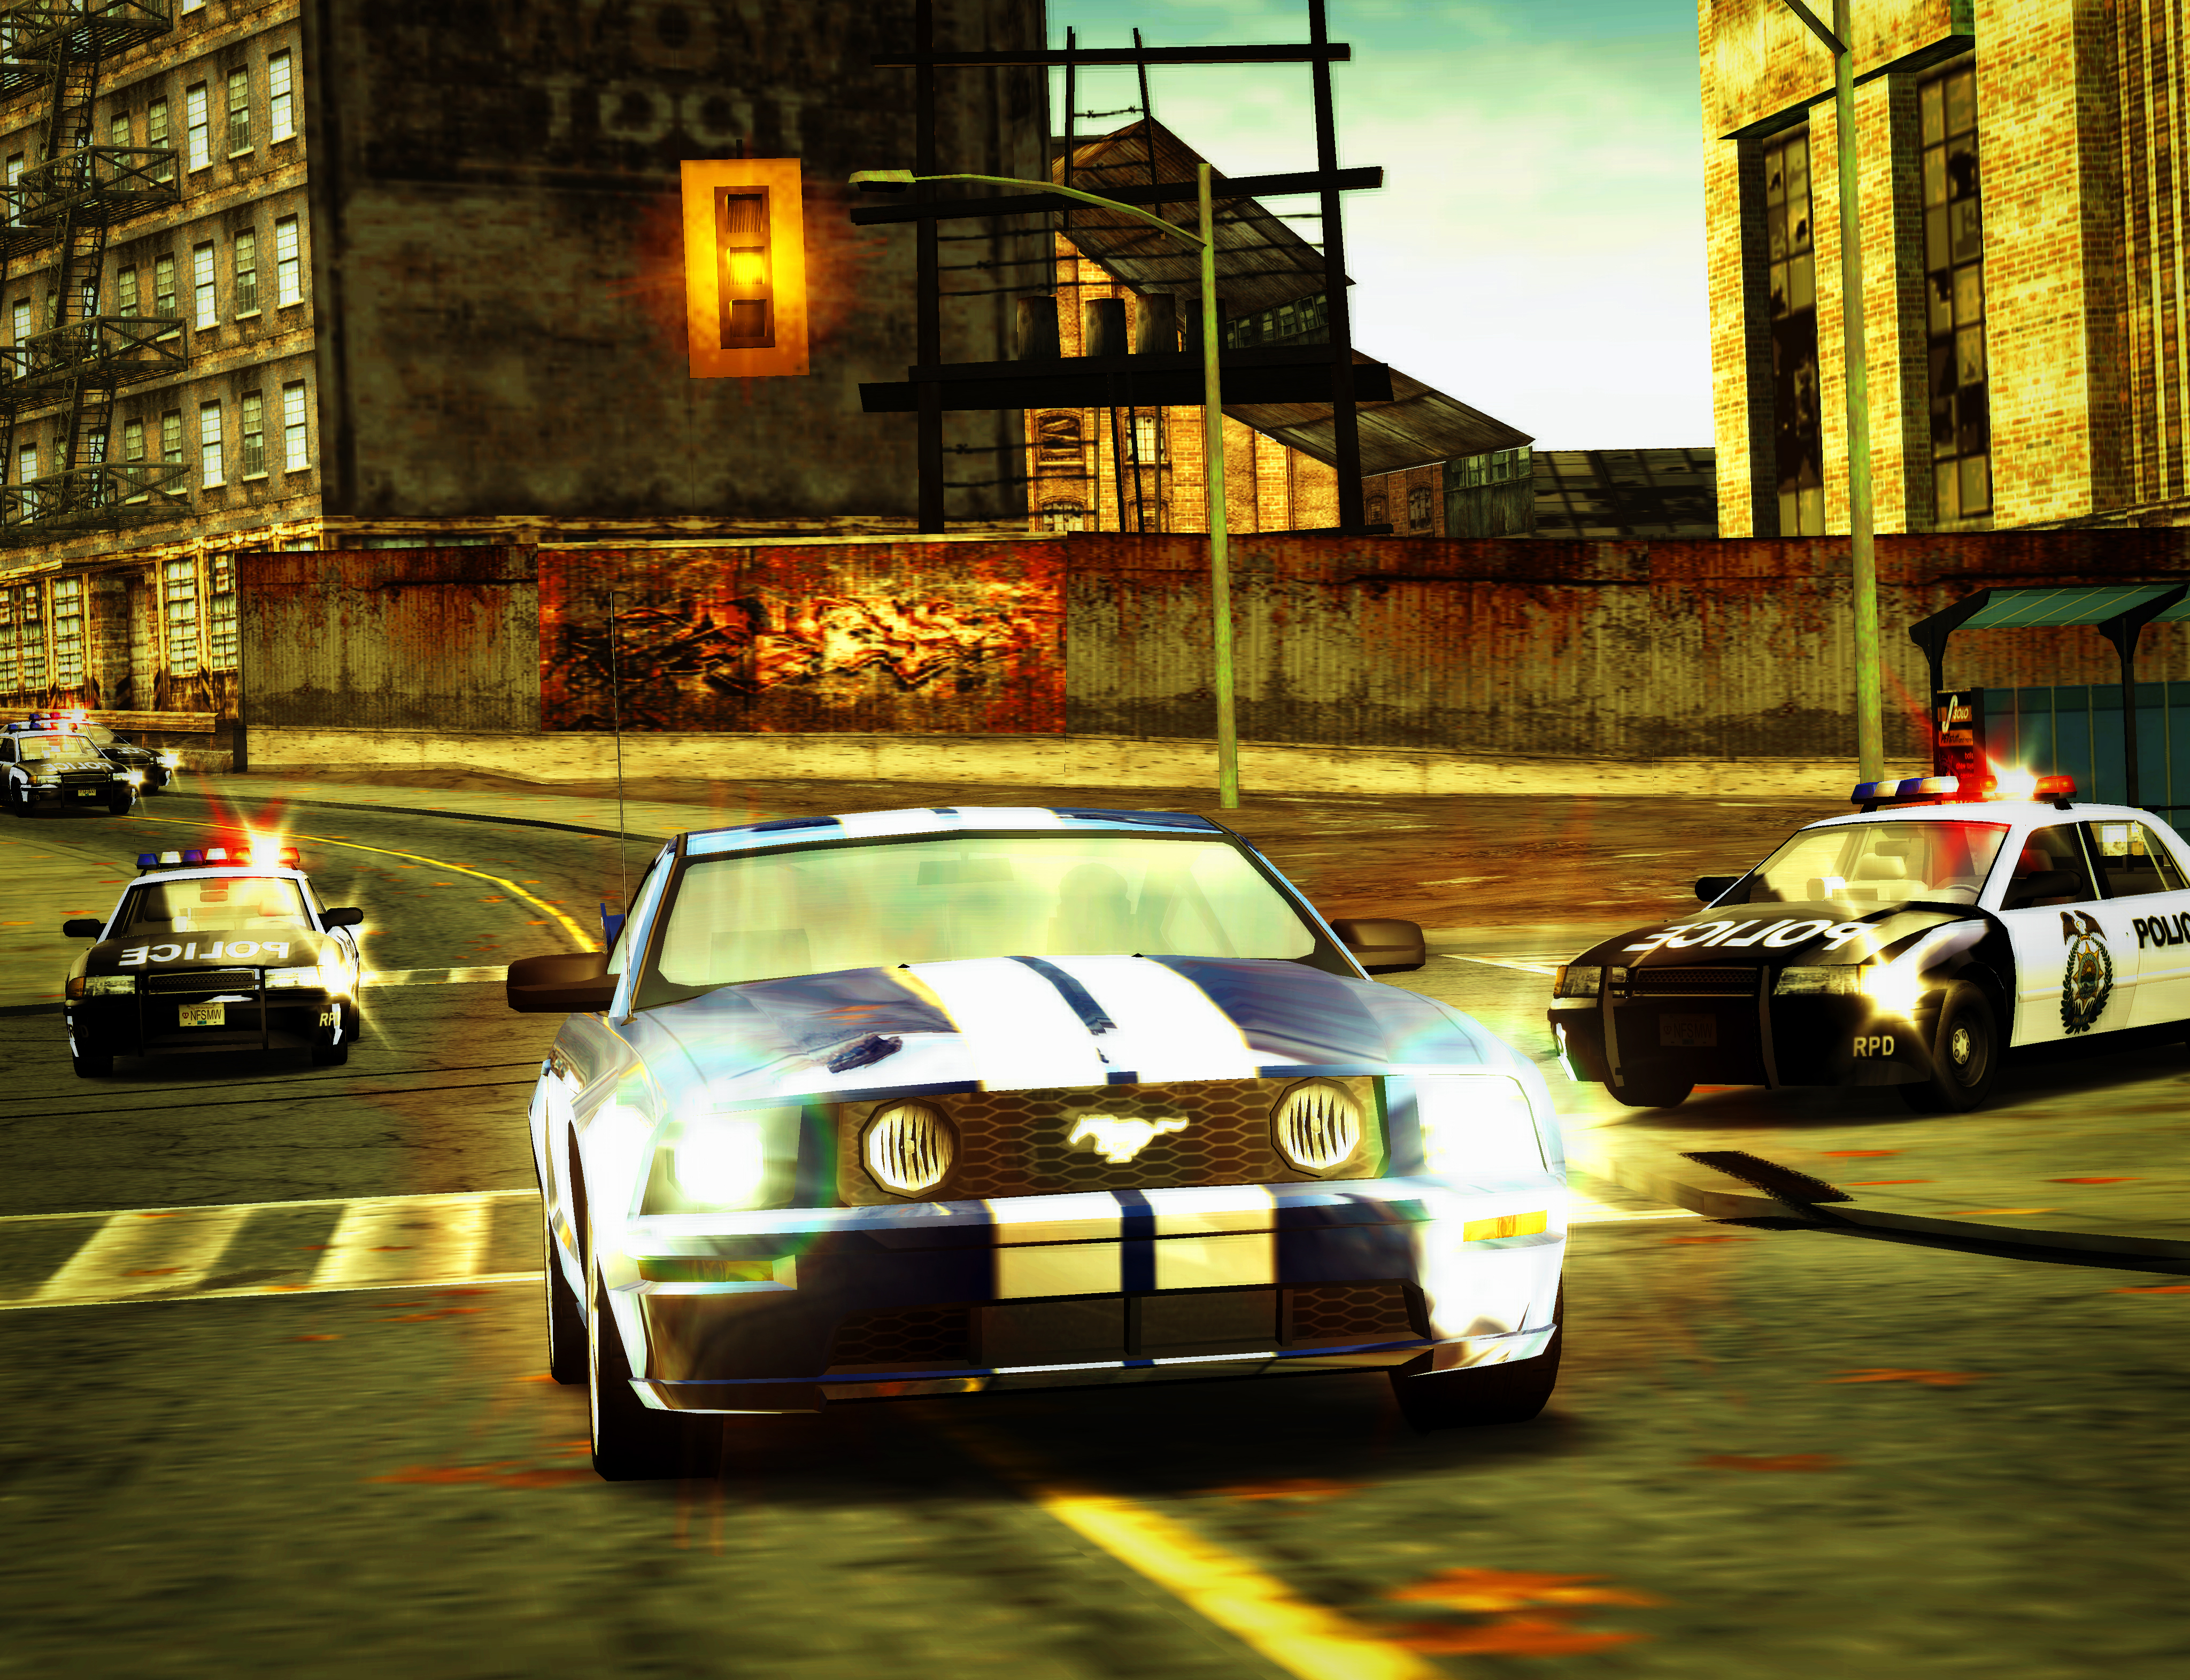 Машины в игре most wanted. Need for Speed most wanted 2005. Нфс МВ 2005. Гонки NFS most wanted. Гонки NFS most wanted 2005.